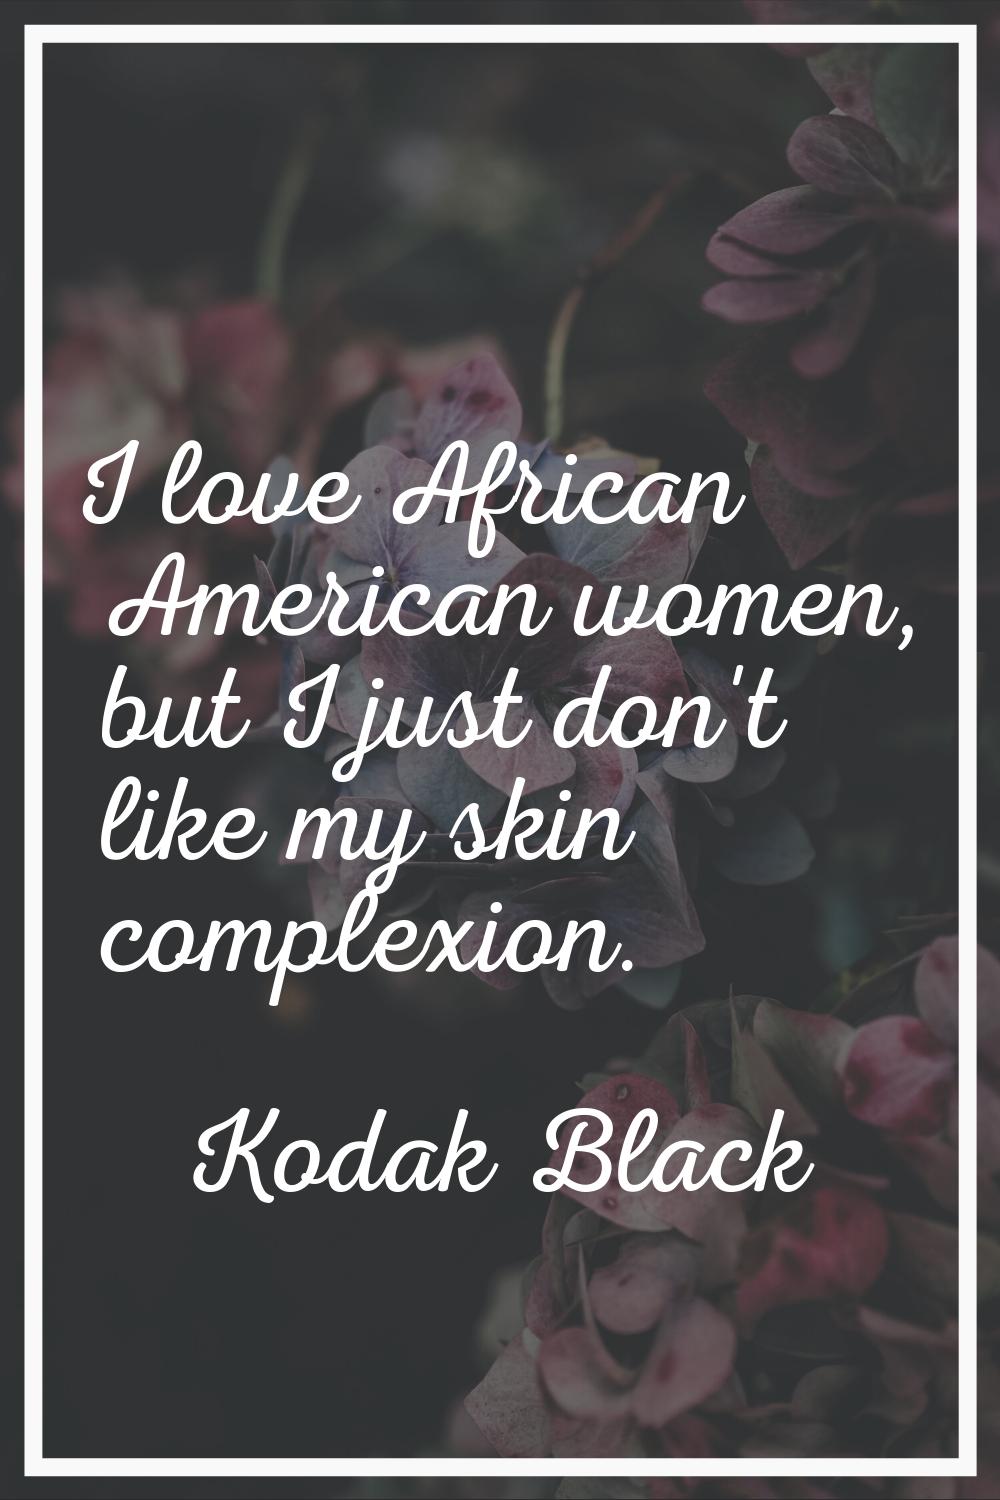 I love African American women, but I just don't like my skin complexion.